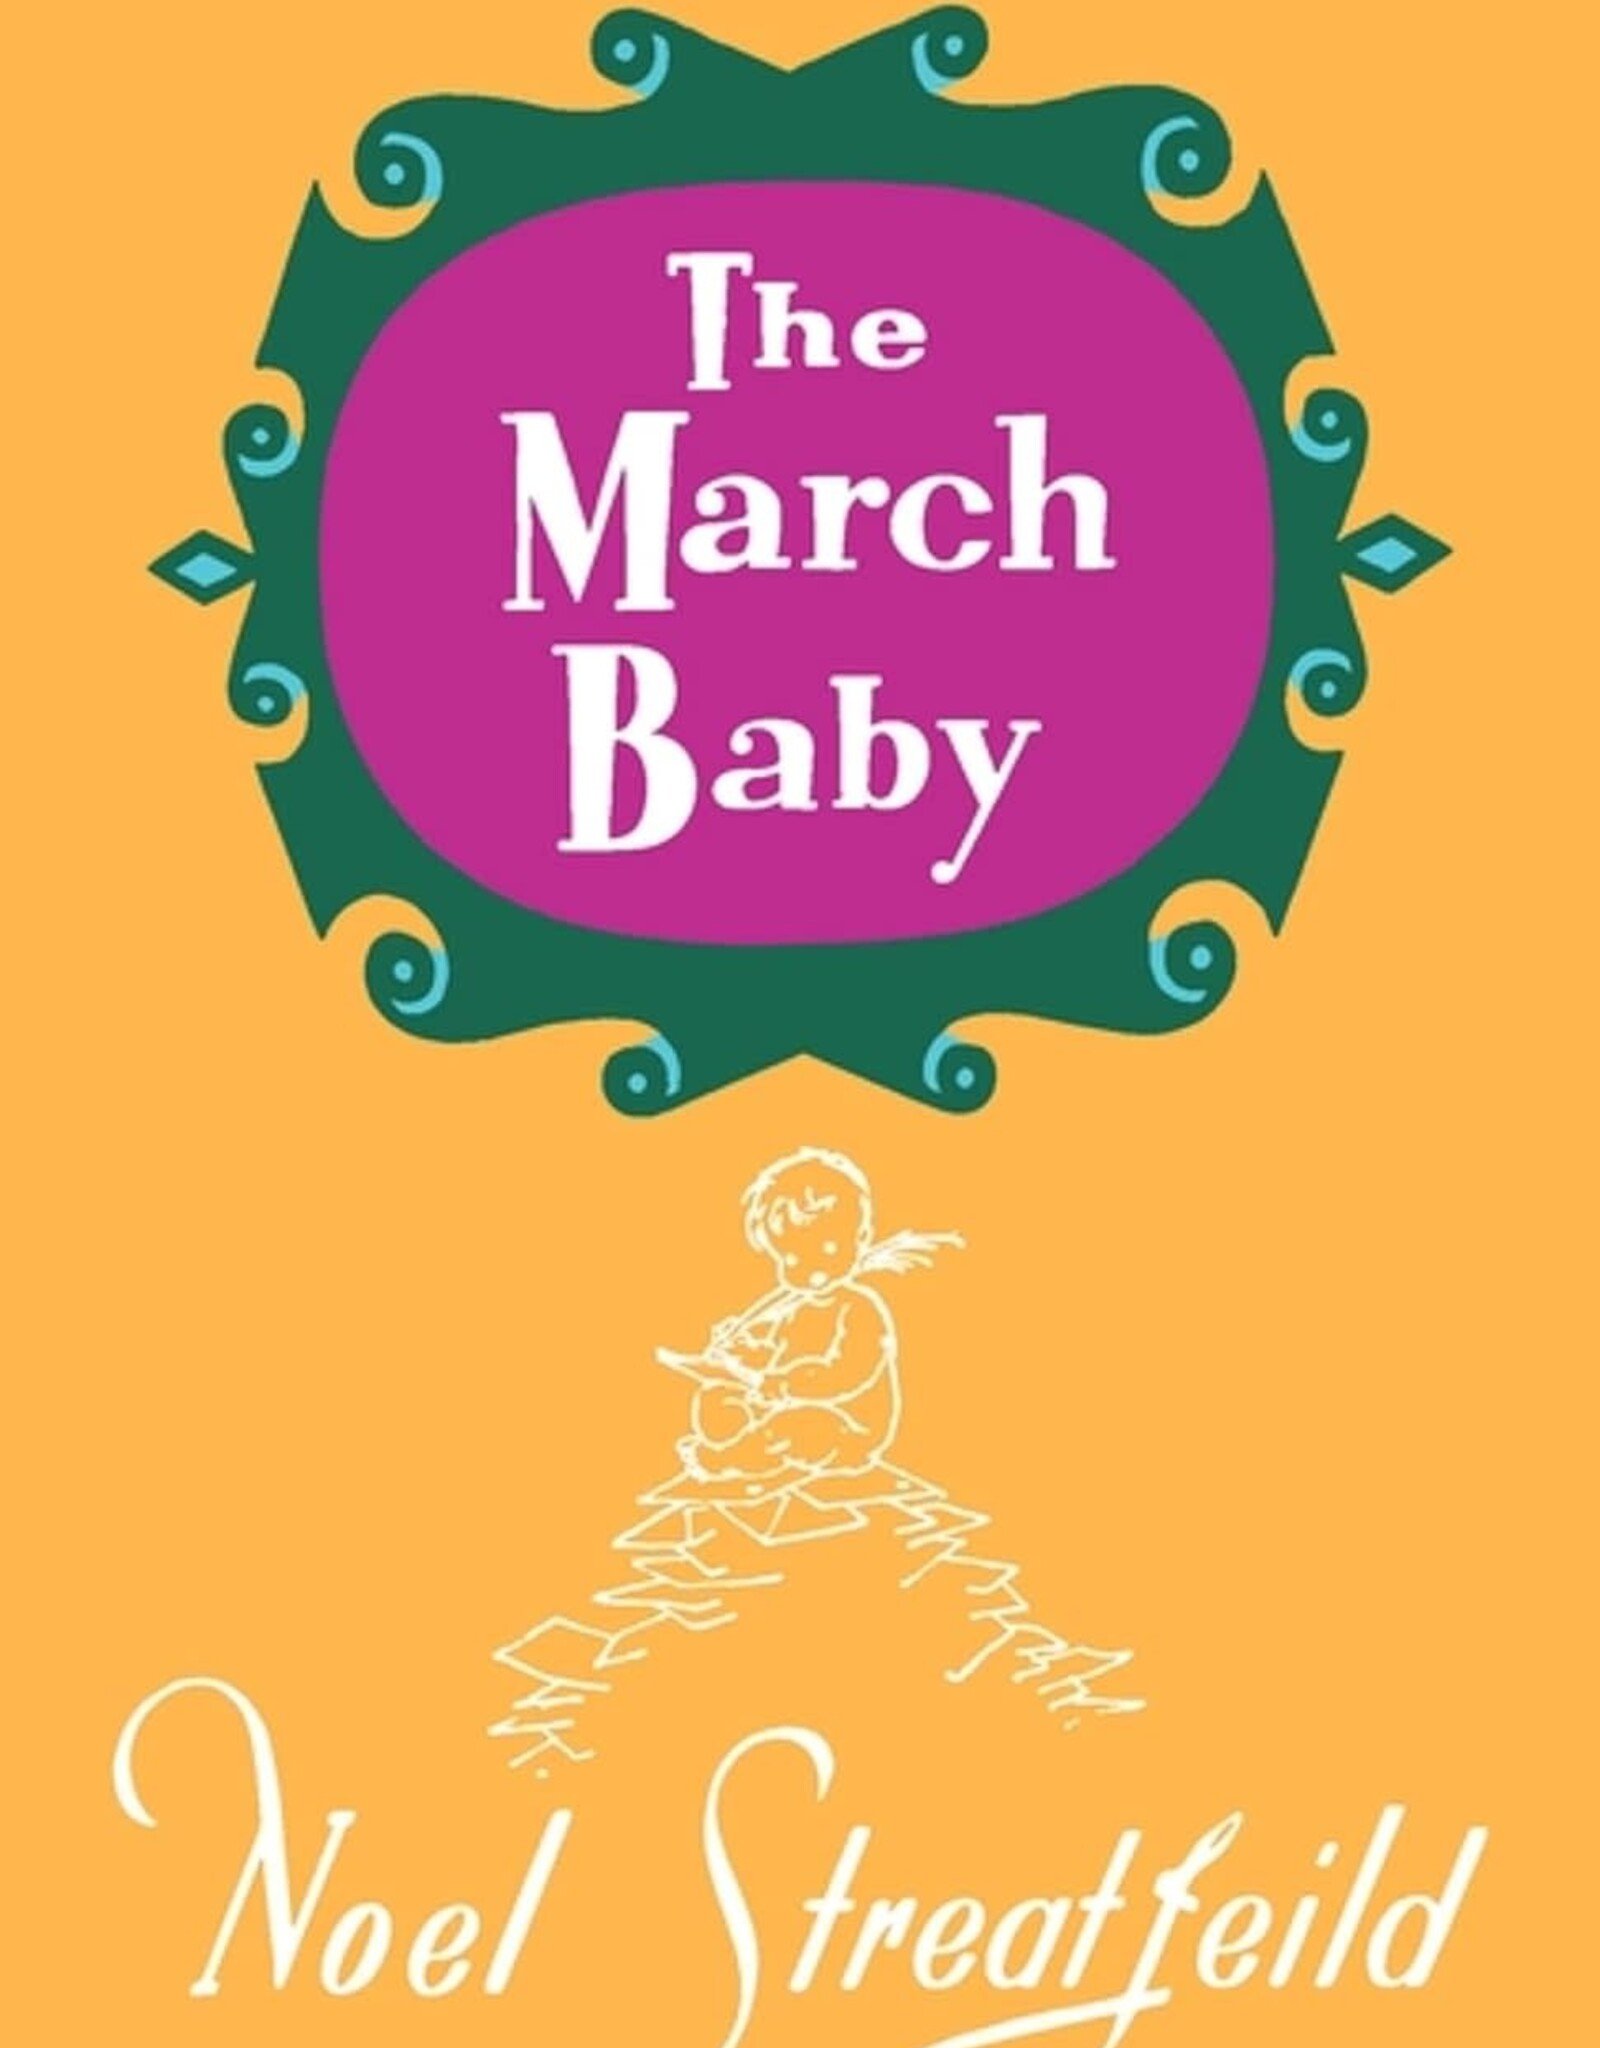 Hachette The March Baby